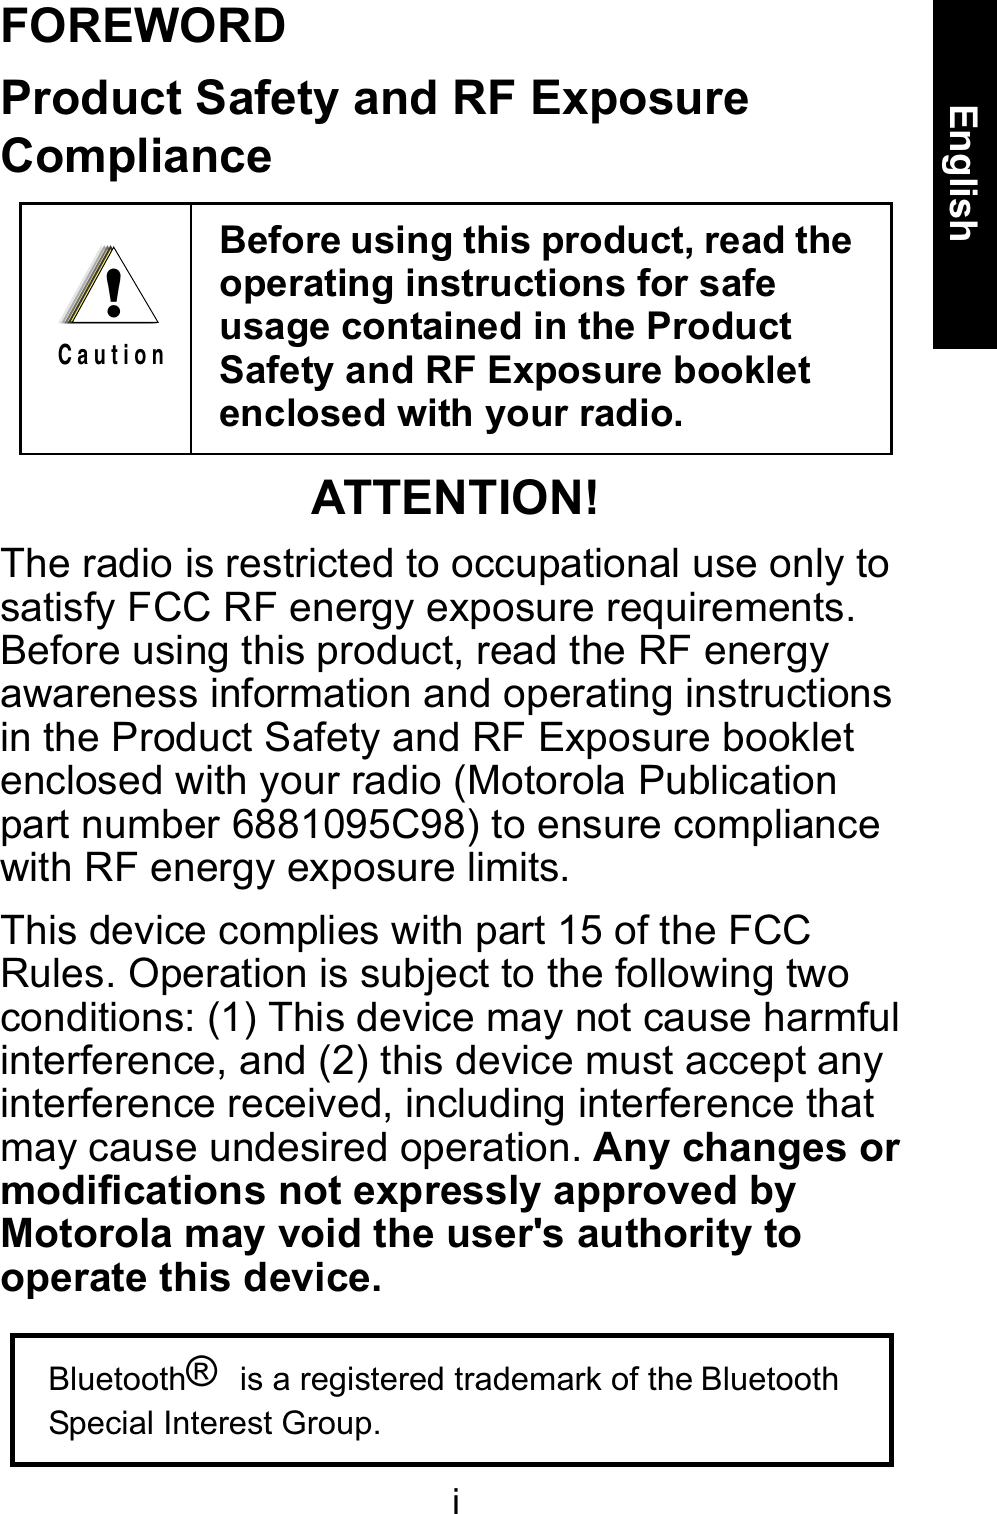 iEnglishFOREWORDProduct Safety and RF Exposure ComplianceATTENTION!The radio is restricted to occupational use only to satisfy FCC RF energy exposure requirements. Before using this product, read the RF energy awareness information and operating instructions in the Product Safety and RF Exposure booklet enclosed with your radio (Motorola Publication part number 6881095C98) to ensure compliance with RF energy exposure limits.This device complies with part 15 of the FCC Rules. Operation is subject to the following two conditions: (1) This device may not cause harmful interference, and (2) this device must accept any interference received, including interference that may cause undesired operation. Any changes or modifications not expressly approved by Motorola may void the user&apos;s authority to operate this device.Before using this product, read the operating instructions for safe usage contained in the Product Safety and RF Exposure booklet enclosed with your radio. !C a u t i o nBluetooth® is a registered trademark of the BluetoothSpecial Interest Group.